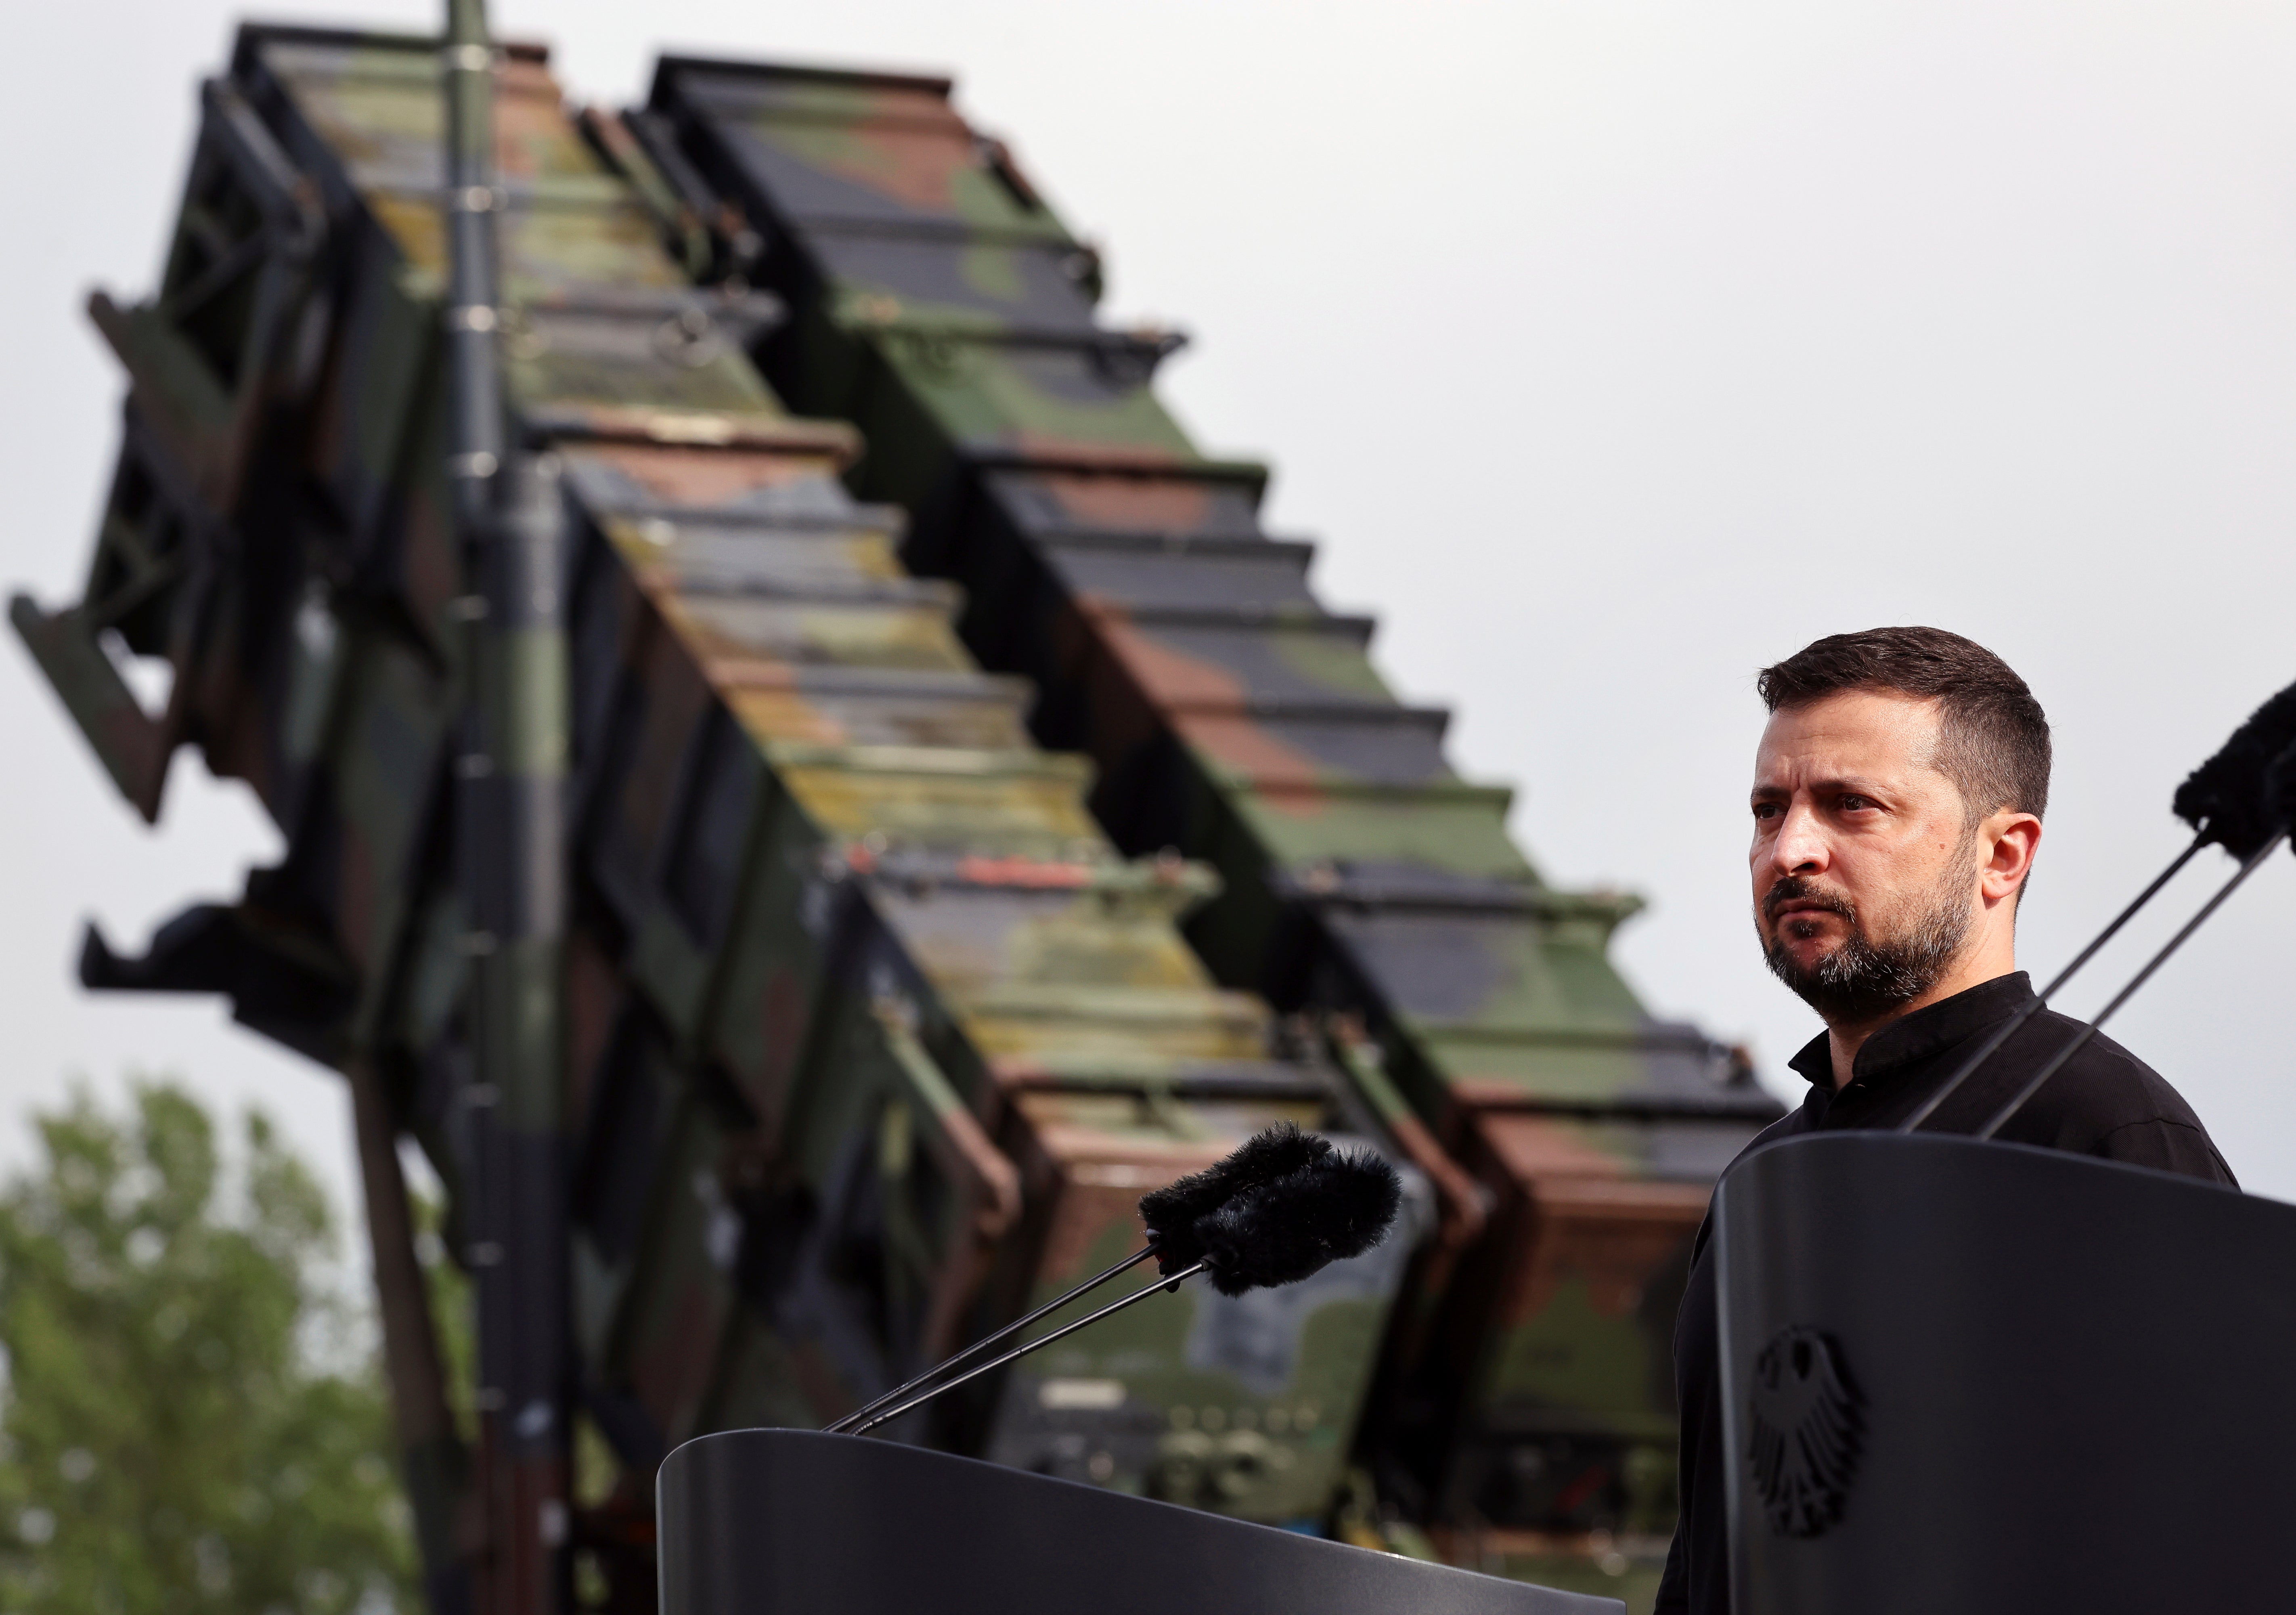 Ukrainian President Volodymyr Zelensky is pictured next to a US-made Patriot air defense missile battery